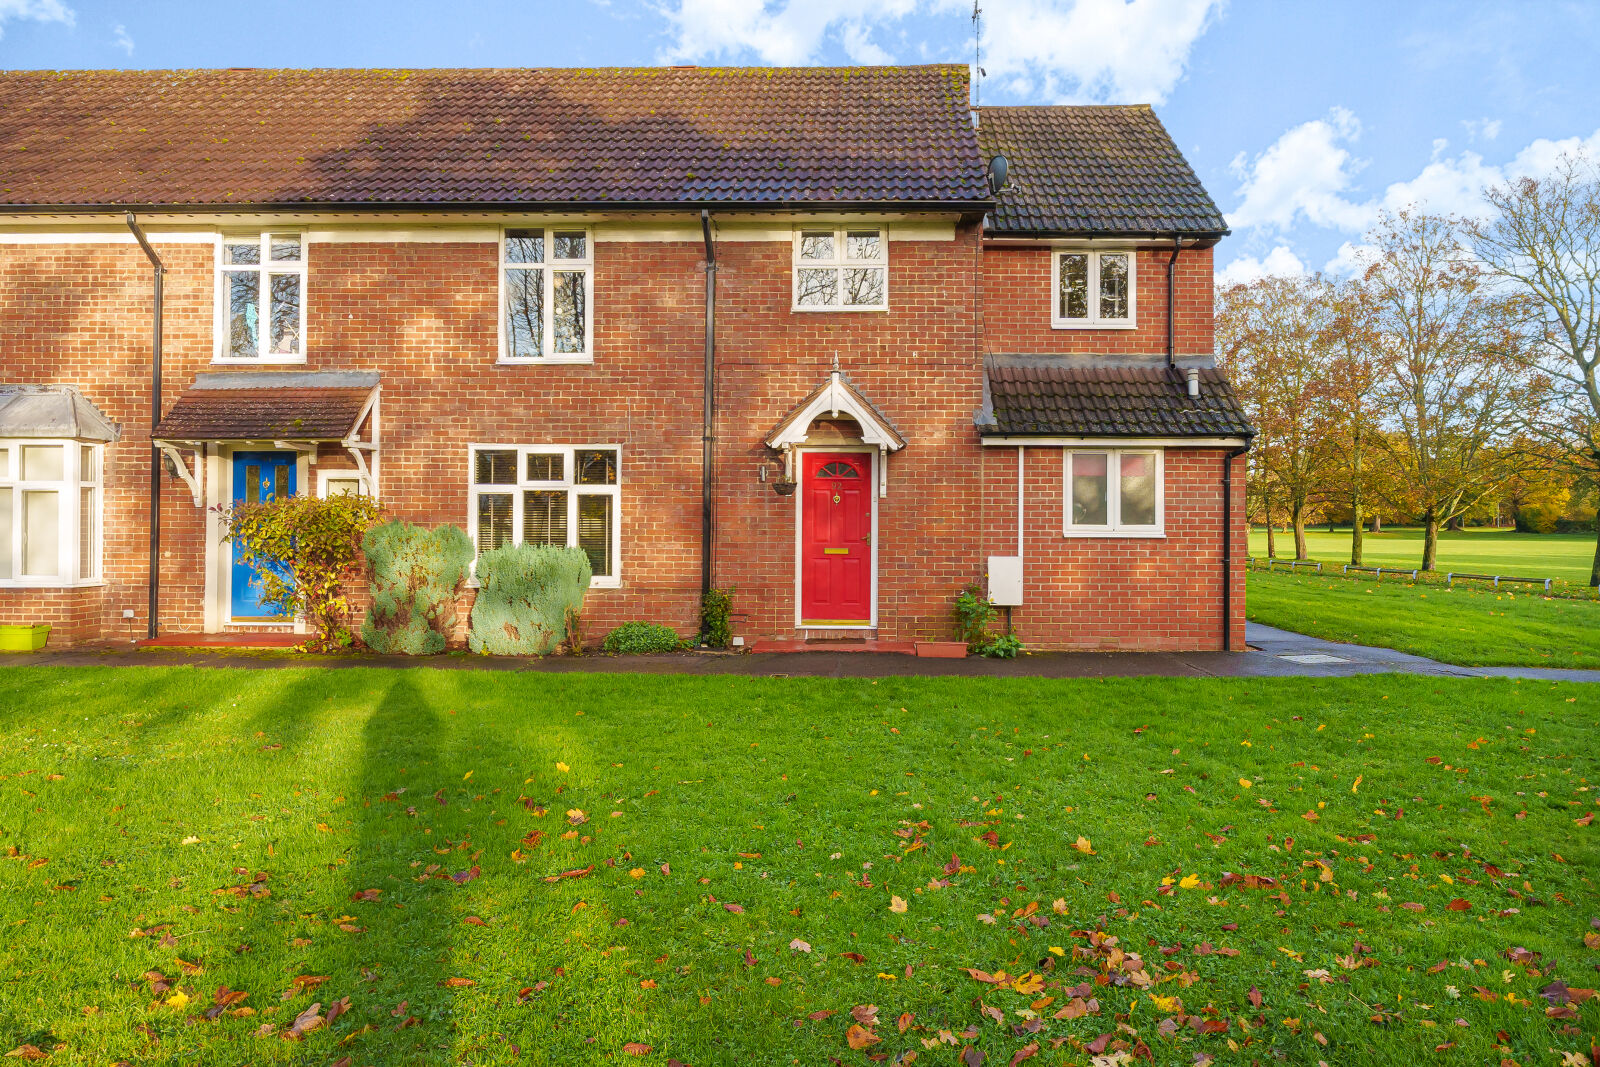 4 bedroom end terraced house for sale Valon Road, Arborfield, RG2, main image